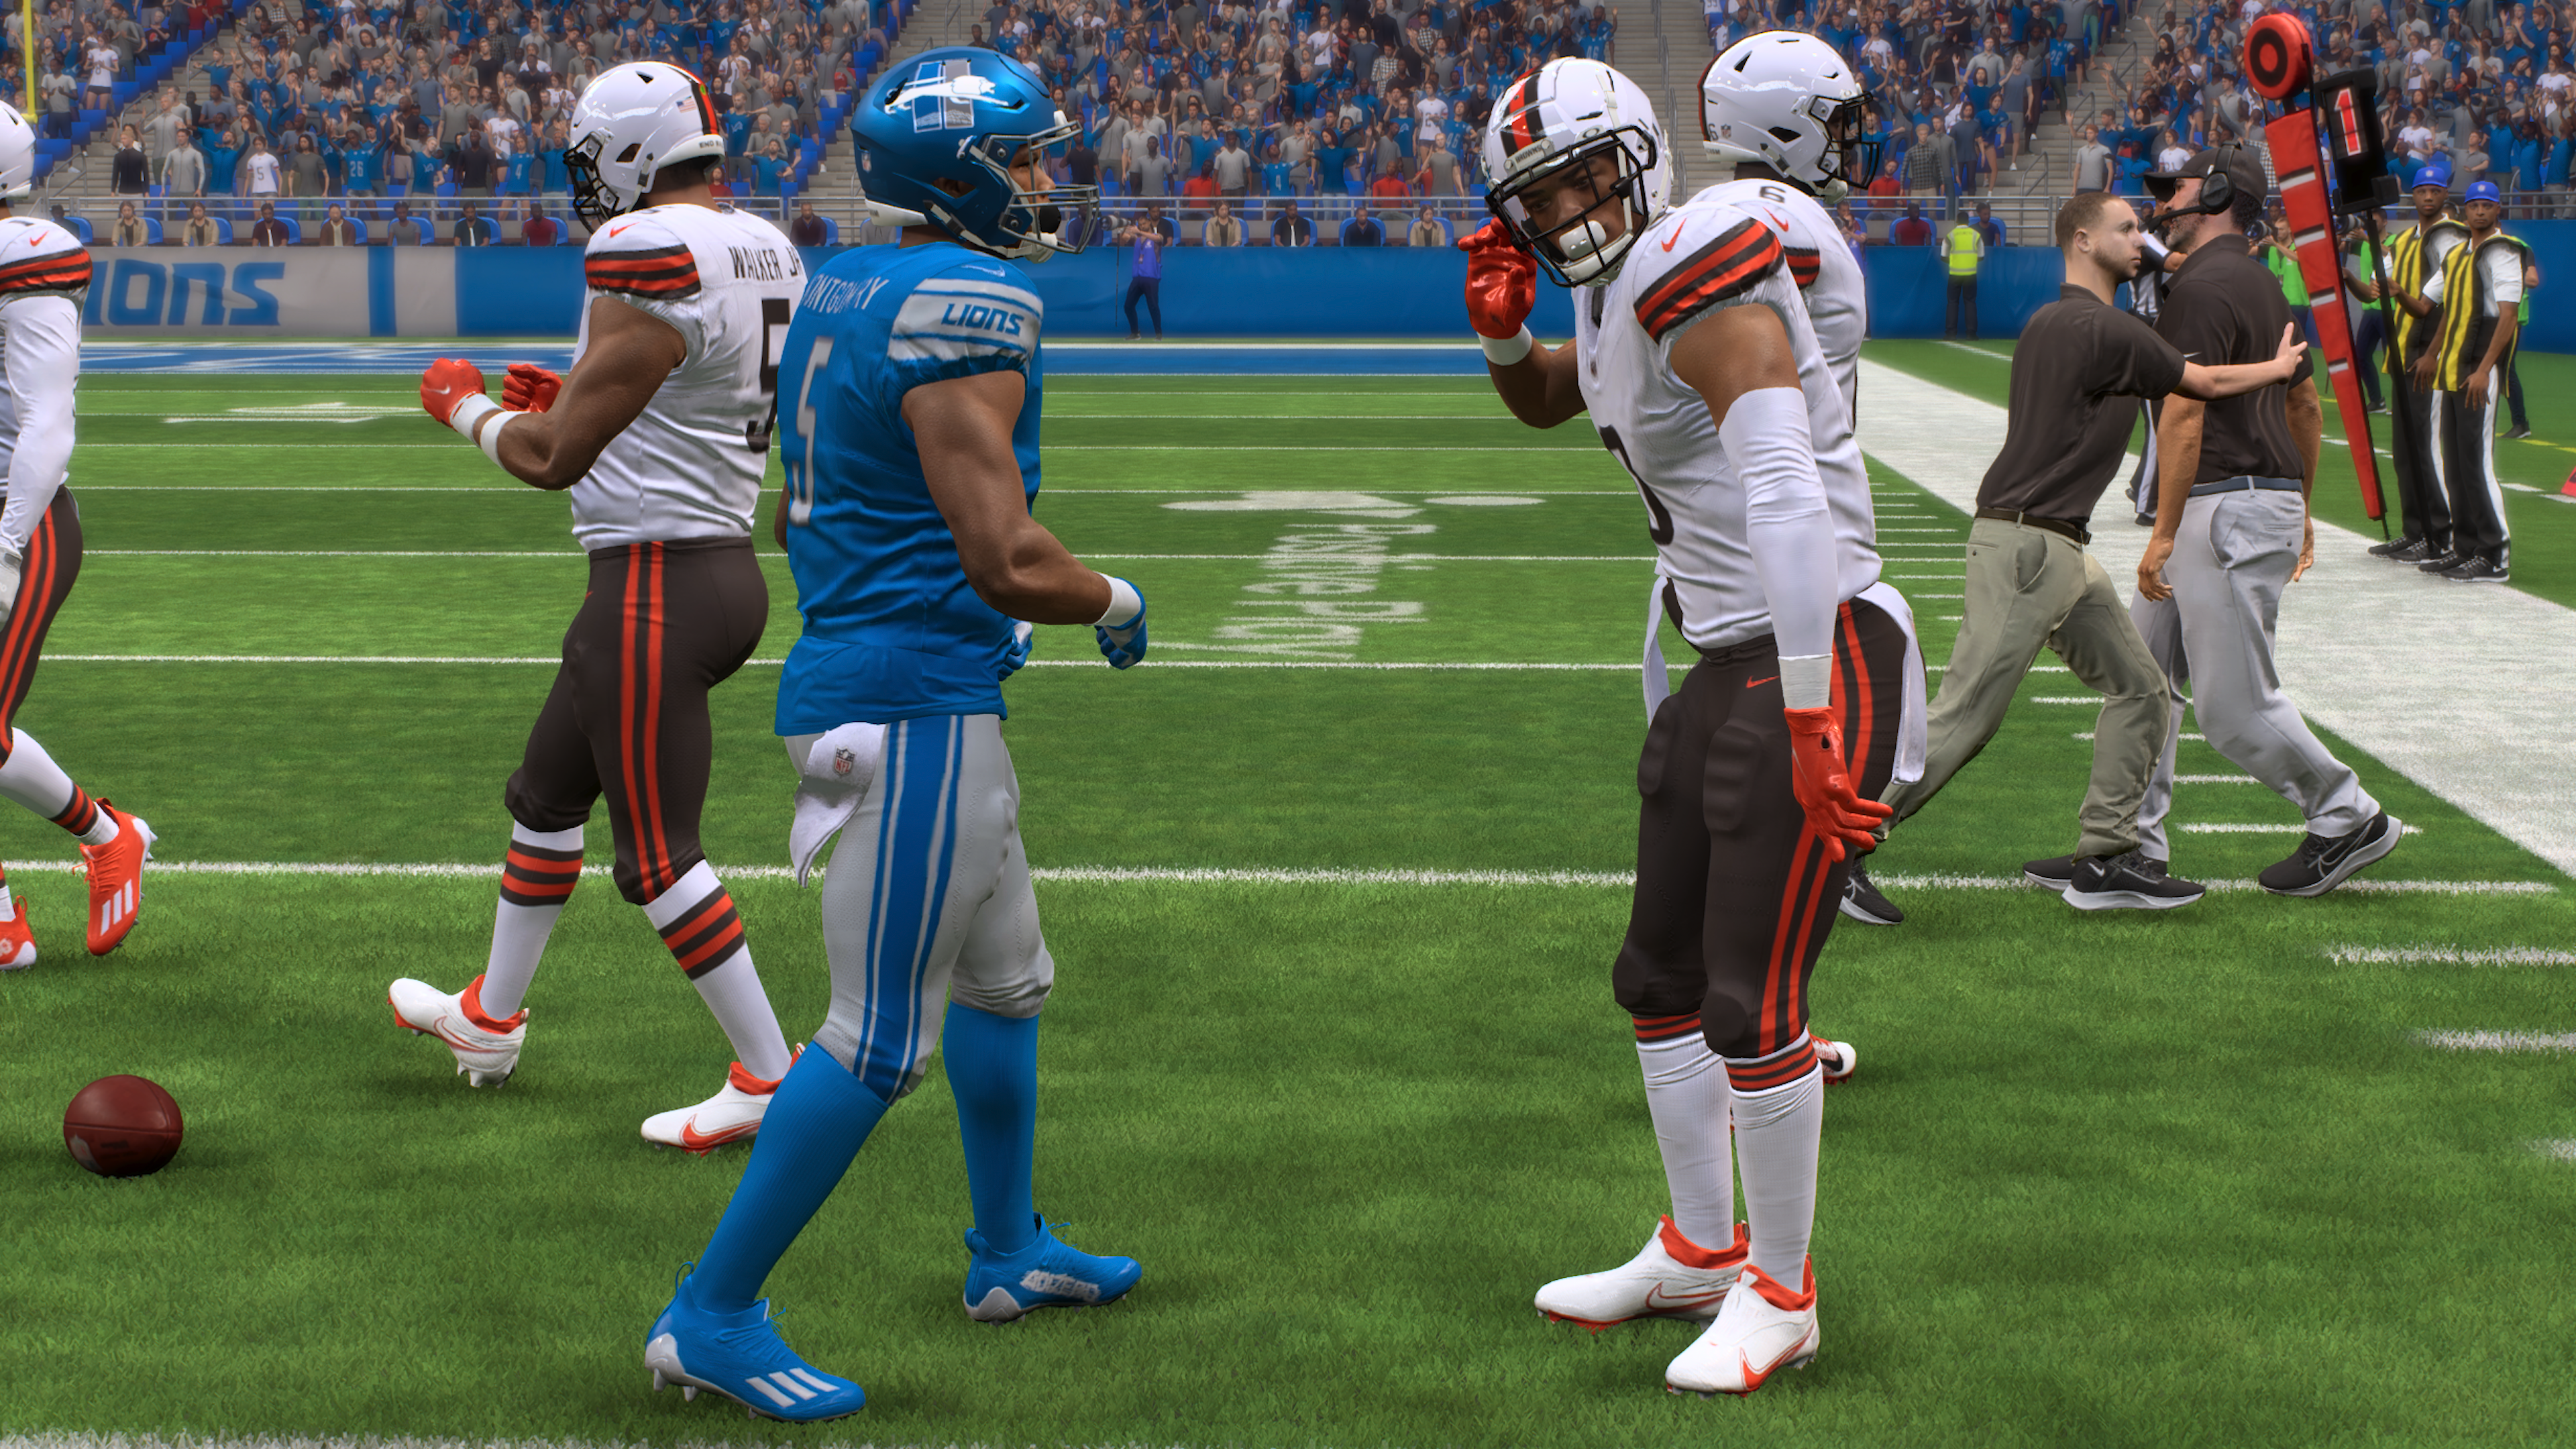 New report sheds light on the return of “EA Sports College Football”